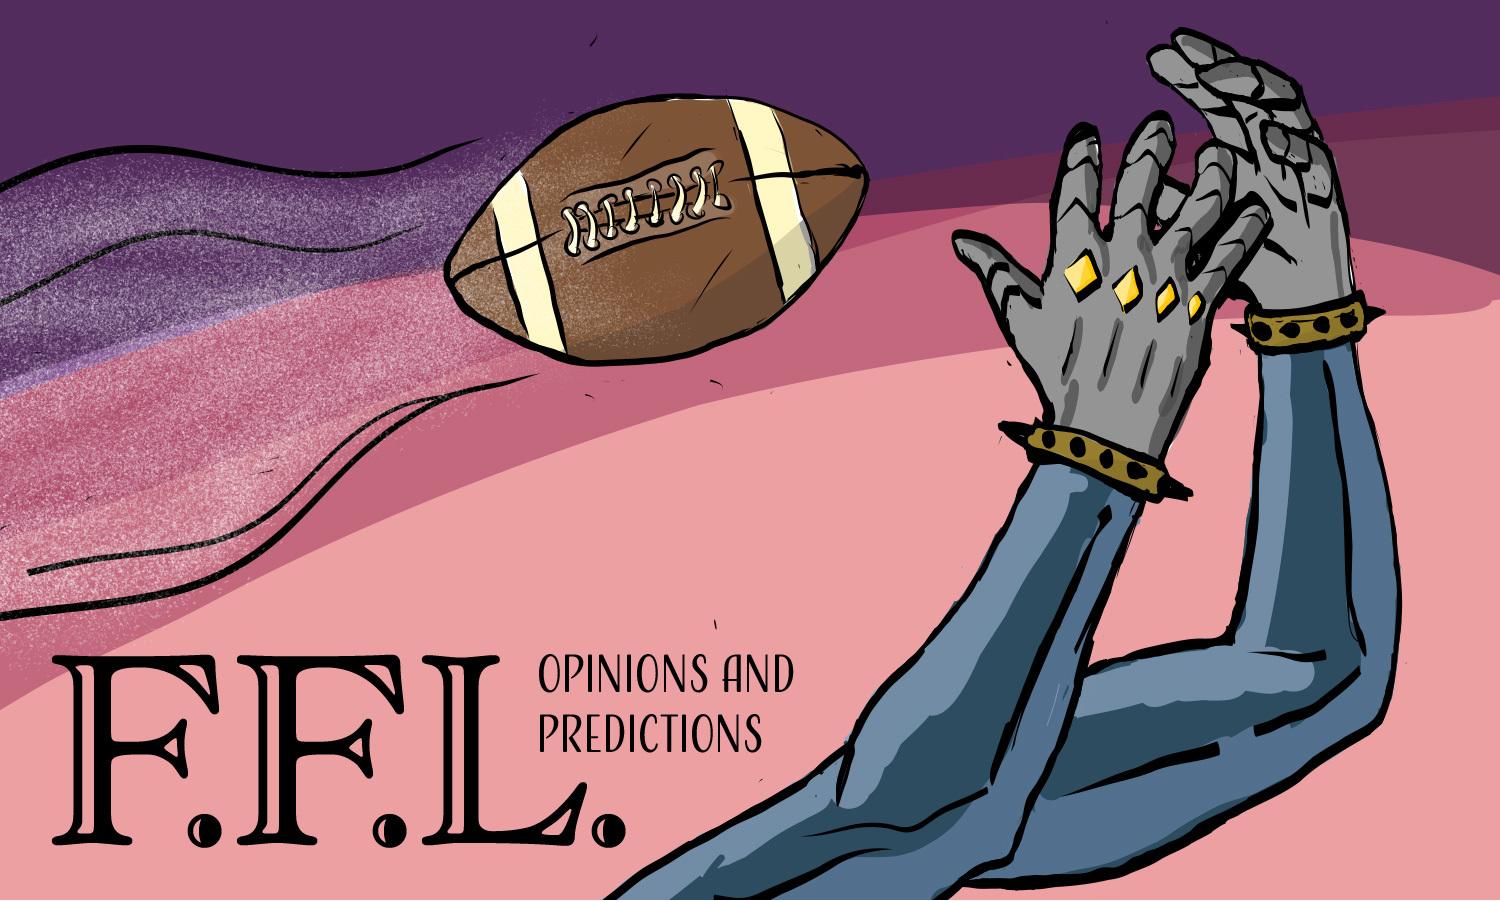 Illustration with the text Fantasy Football League Opinions and Predictions in the bottom left corner. The illustration being is 2 hands catching a football